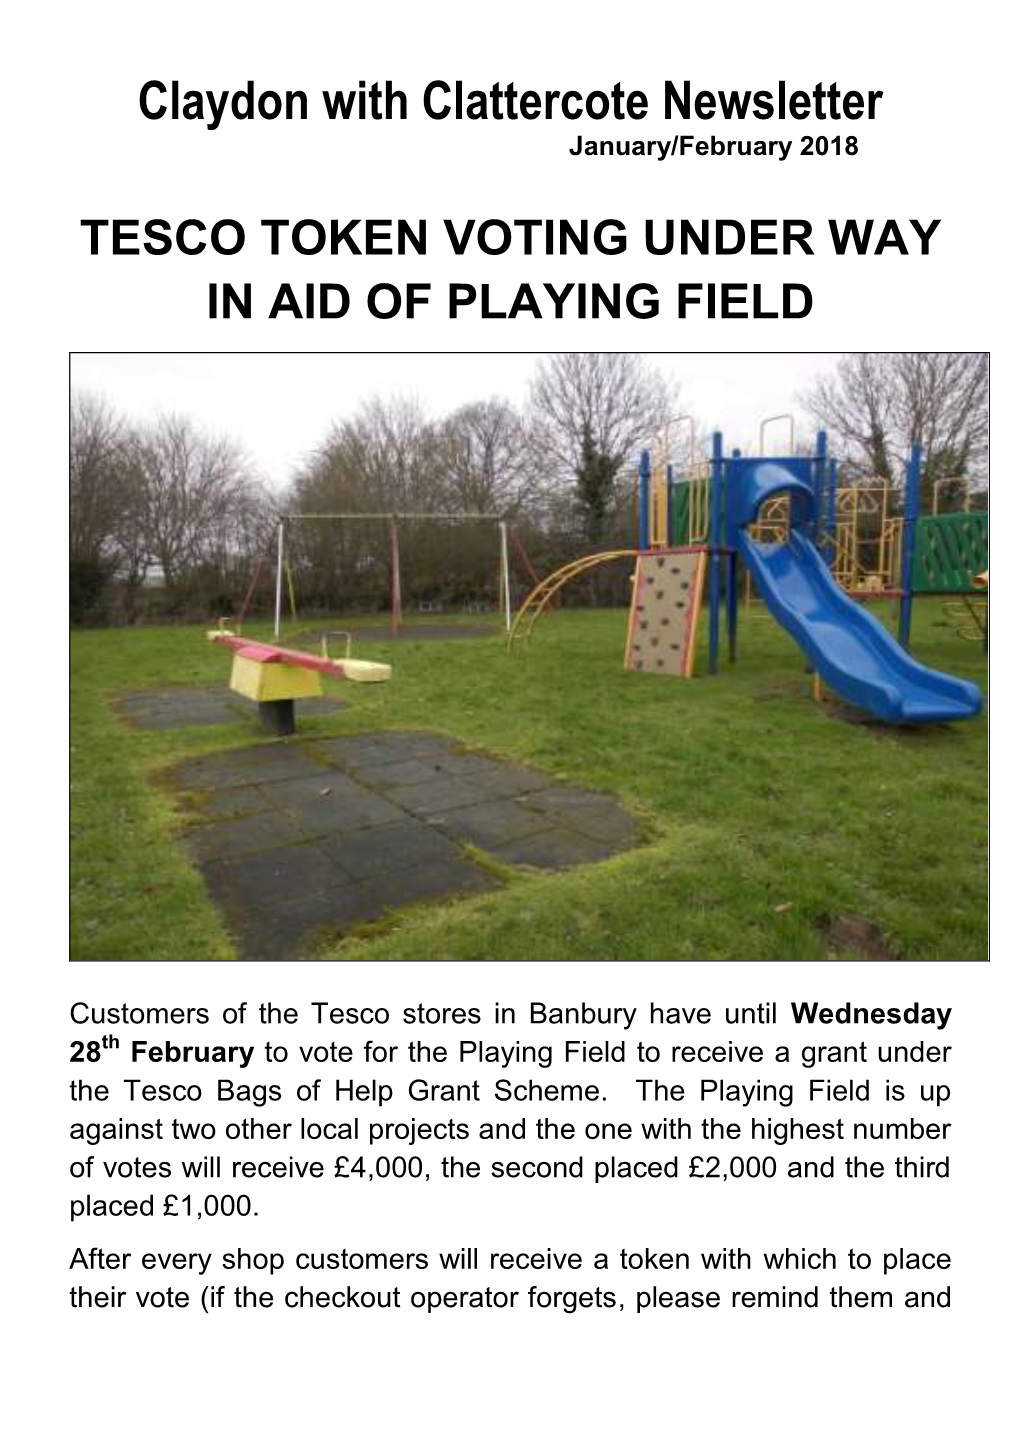 Tesco Token Voting Under Way in Aid of Playing Field